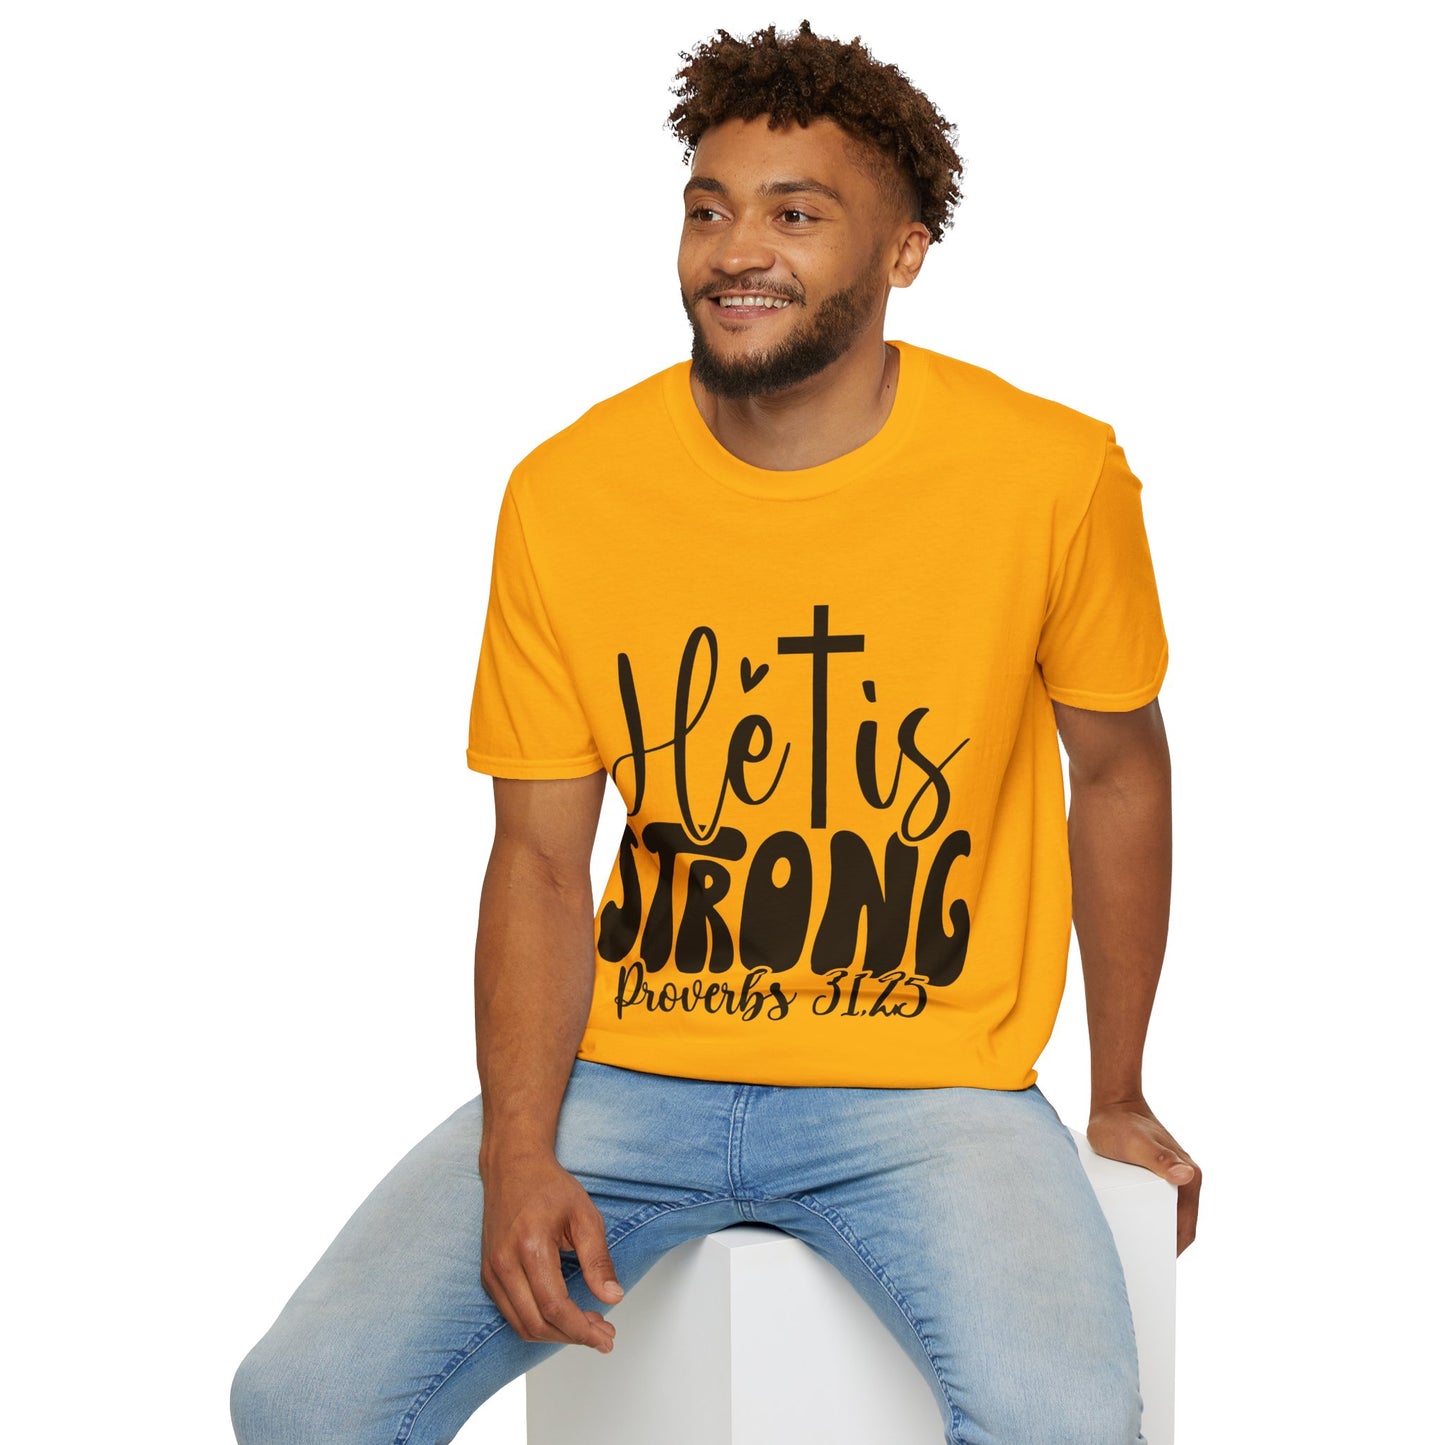 He Is Strong Proverbs 31:25 Triple Viking T-Shirt